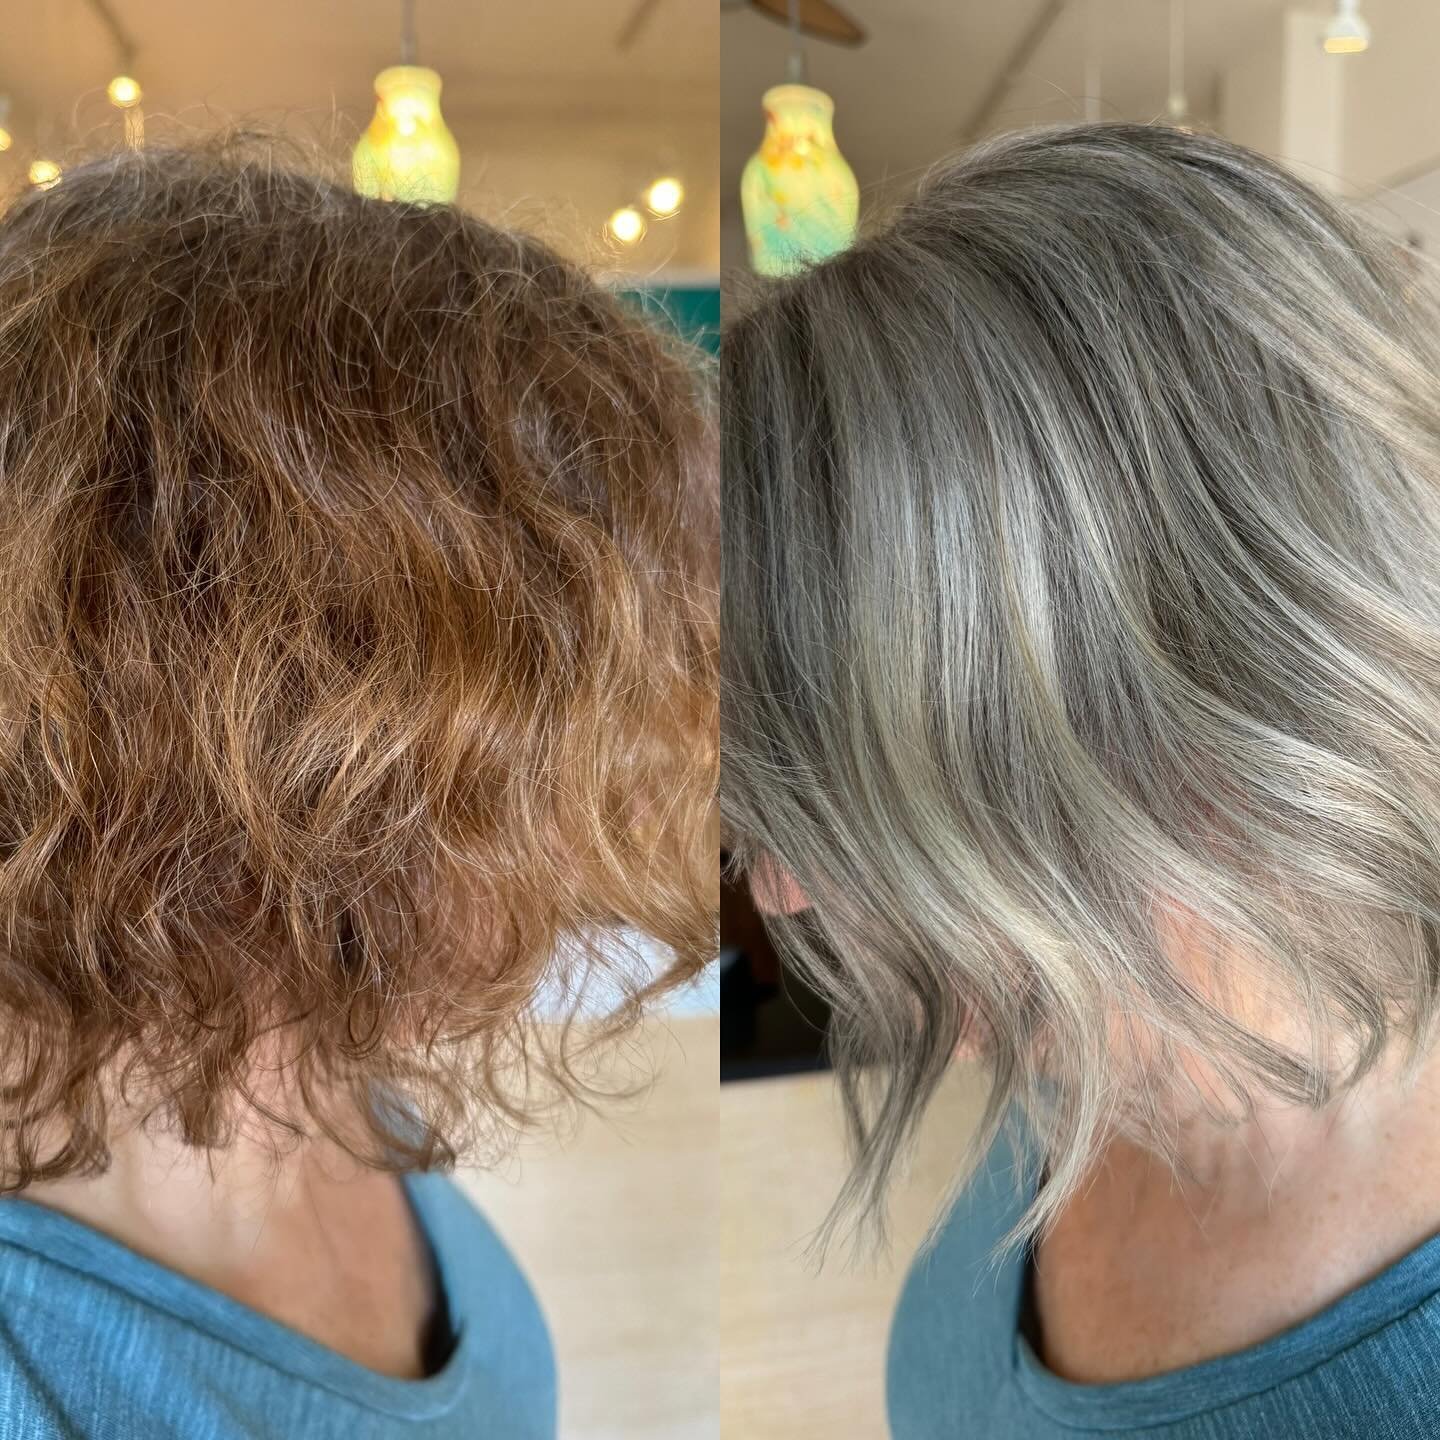 👉🏻 From coloring to going grey. This client was my &ldquo;model&rdquo; for letting me practice a process for her going grey. She was coloring her hair often with permanent dye. Then grew her roots out a few inches so I could see her natural pattern